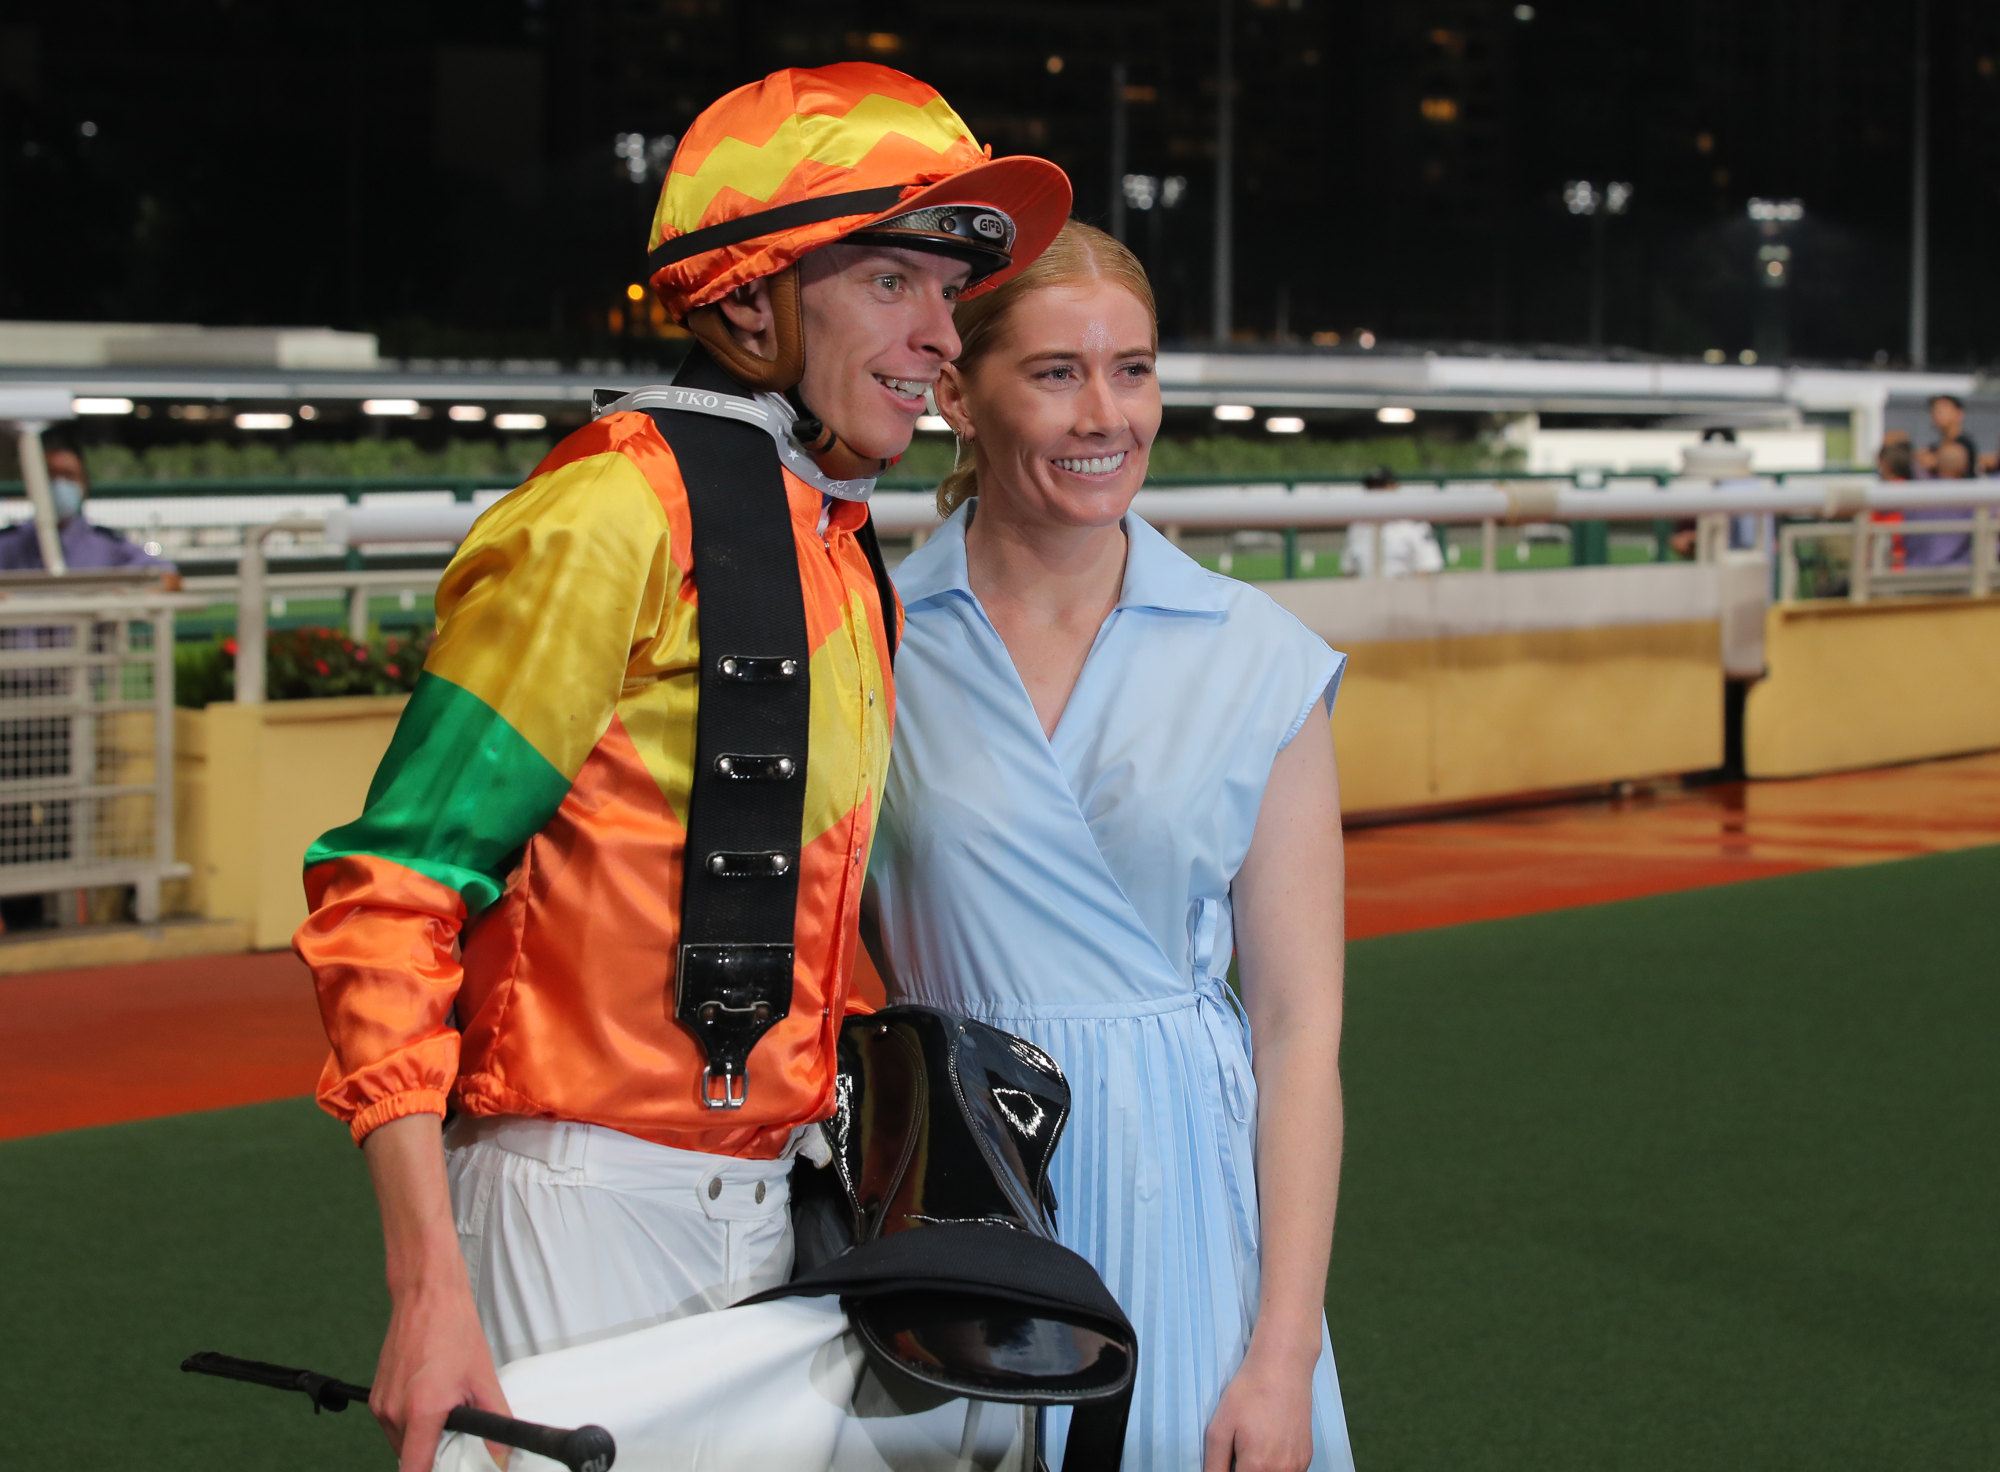 Michael Dee savours his Happy Valley victory on Starry Night with his partner, former jockey Mikaela Lawrence.